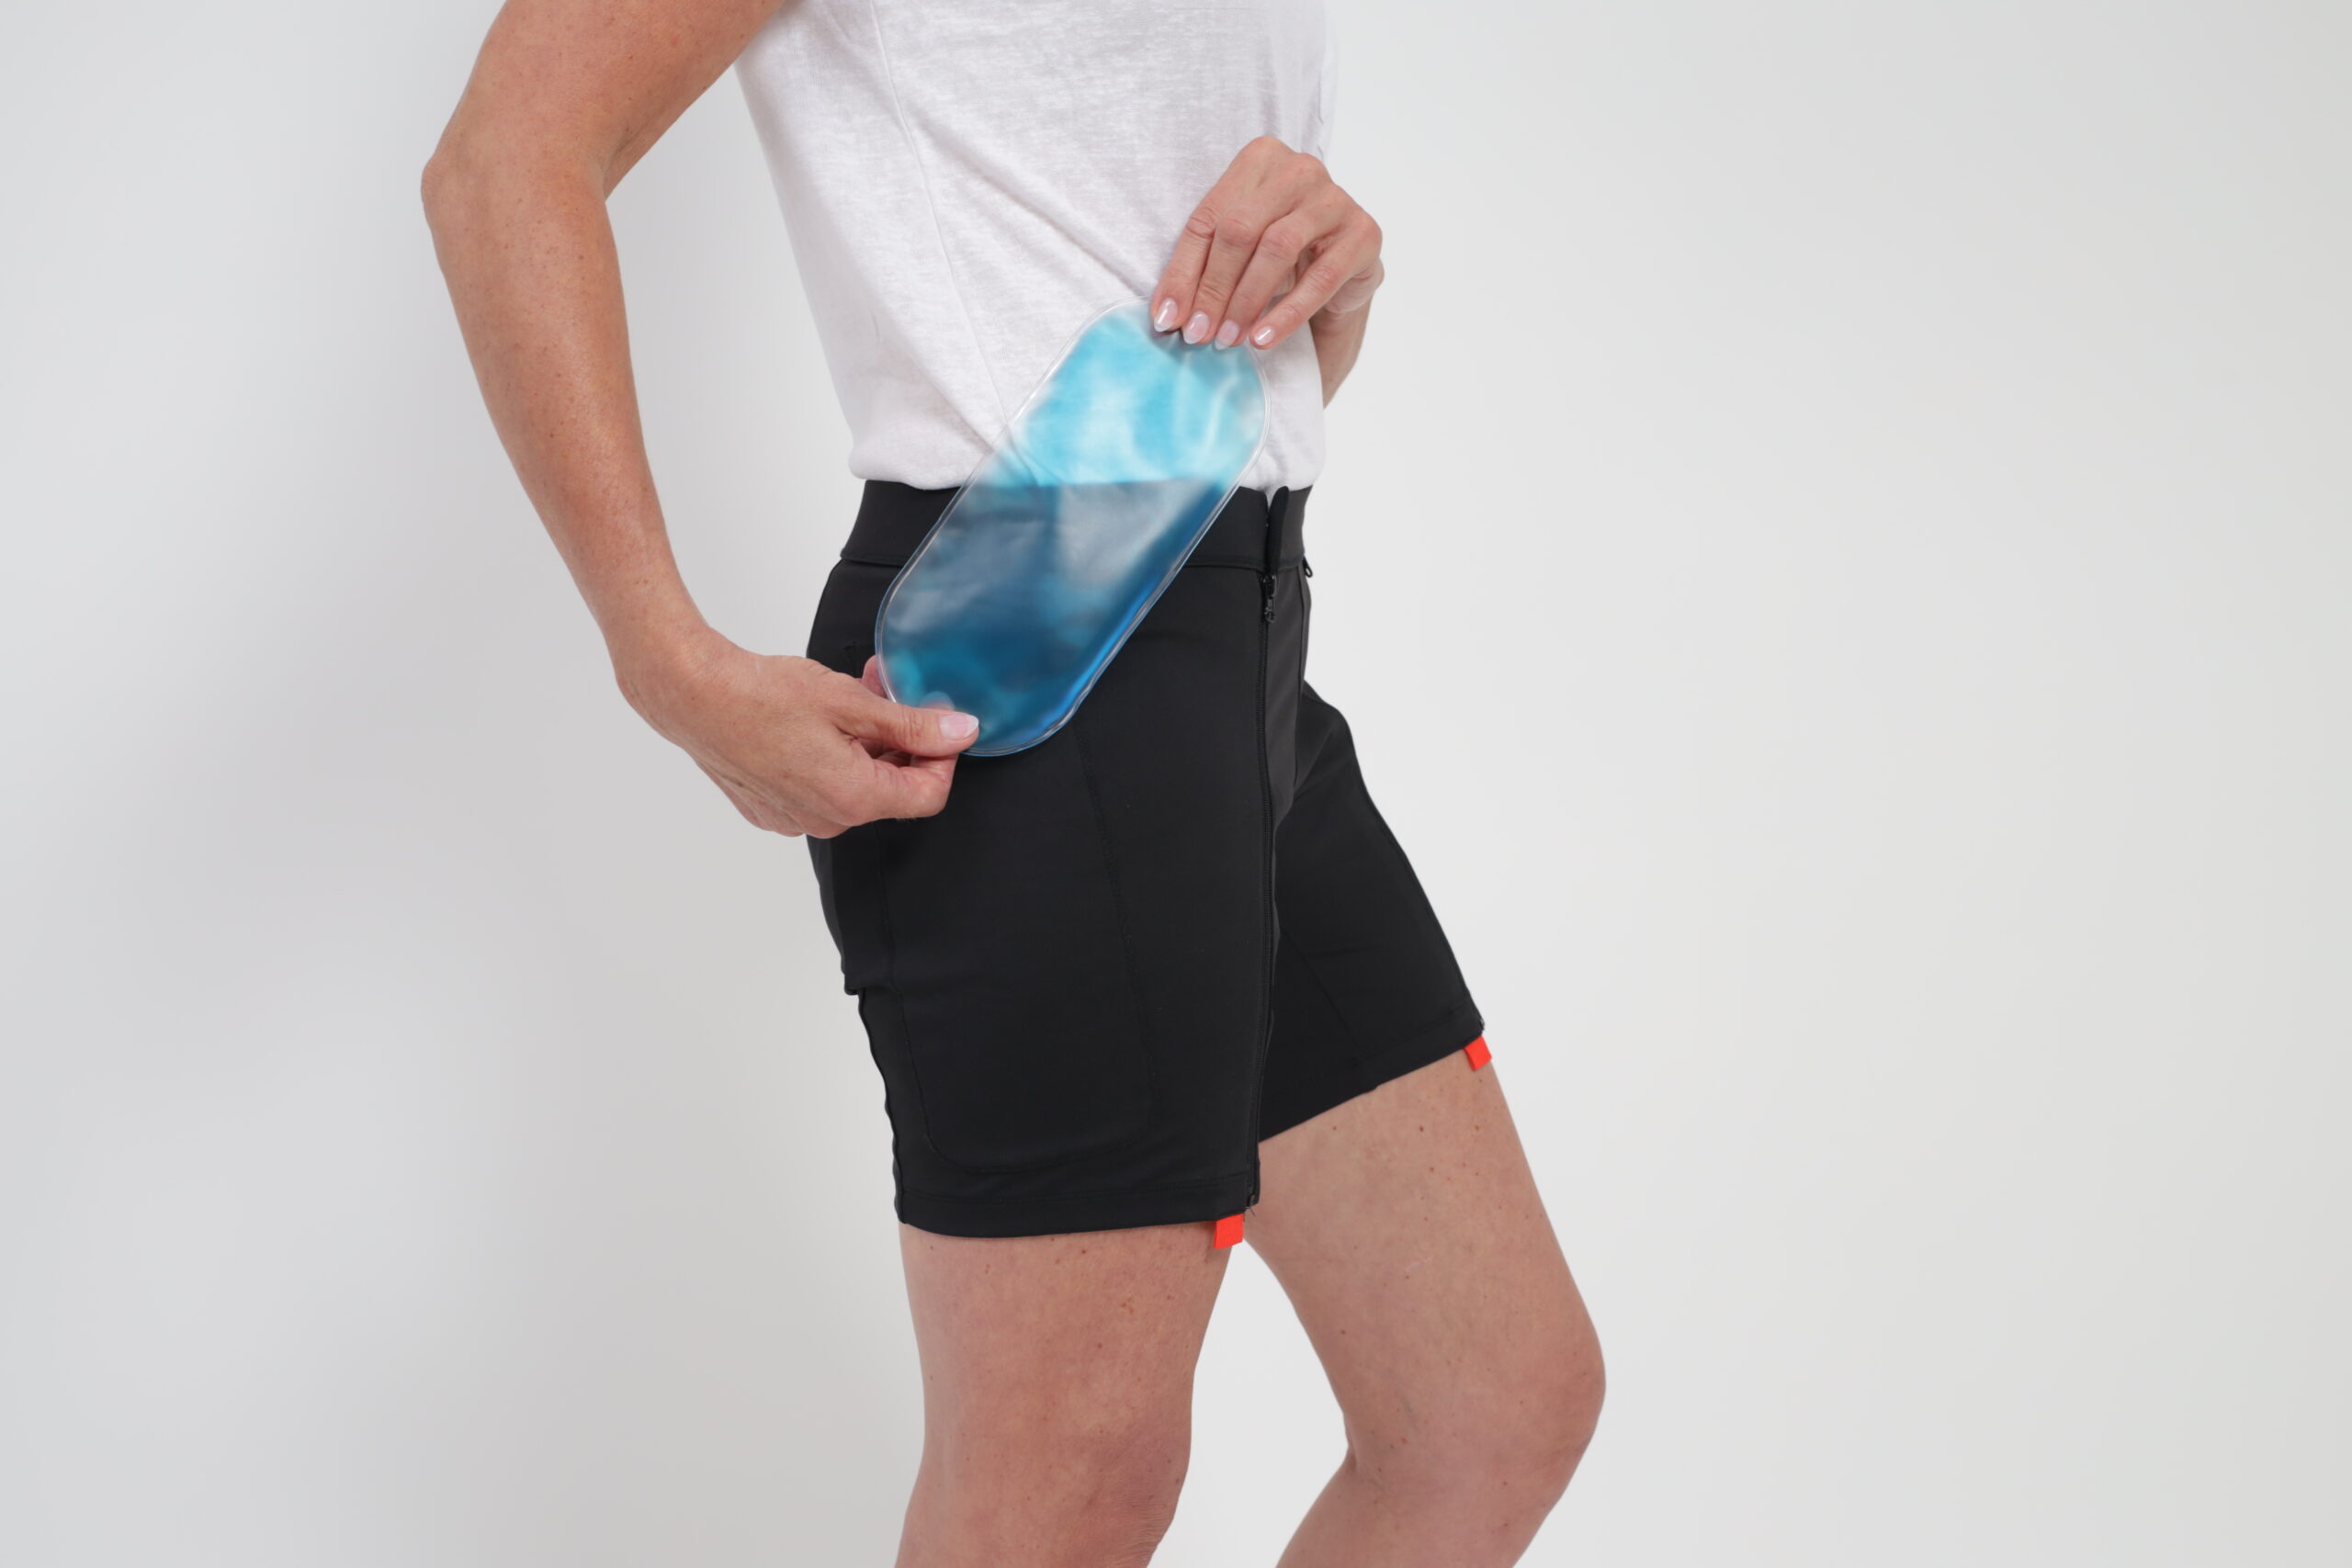 An individual demonstrates how to place an EasyReach cooling gel pad for the body into a custom pocket on the side of the shorts.